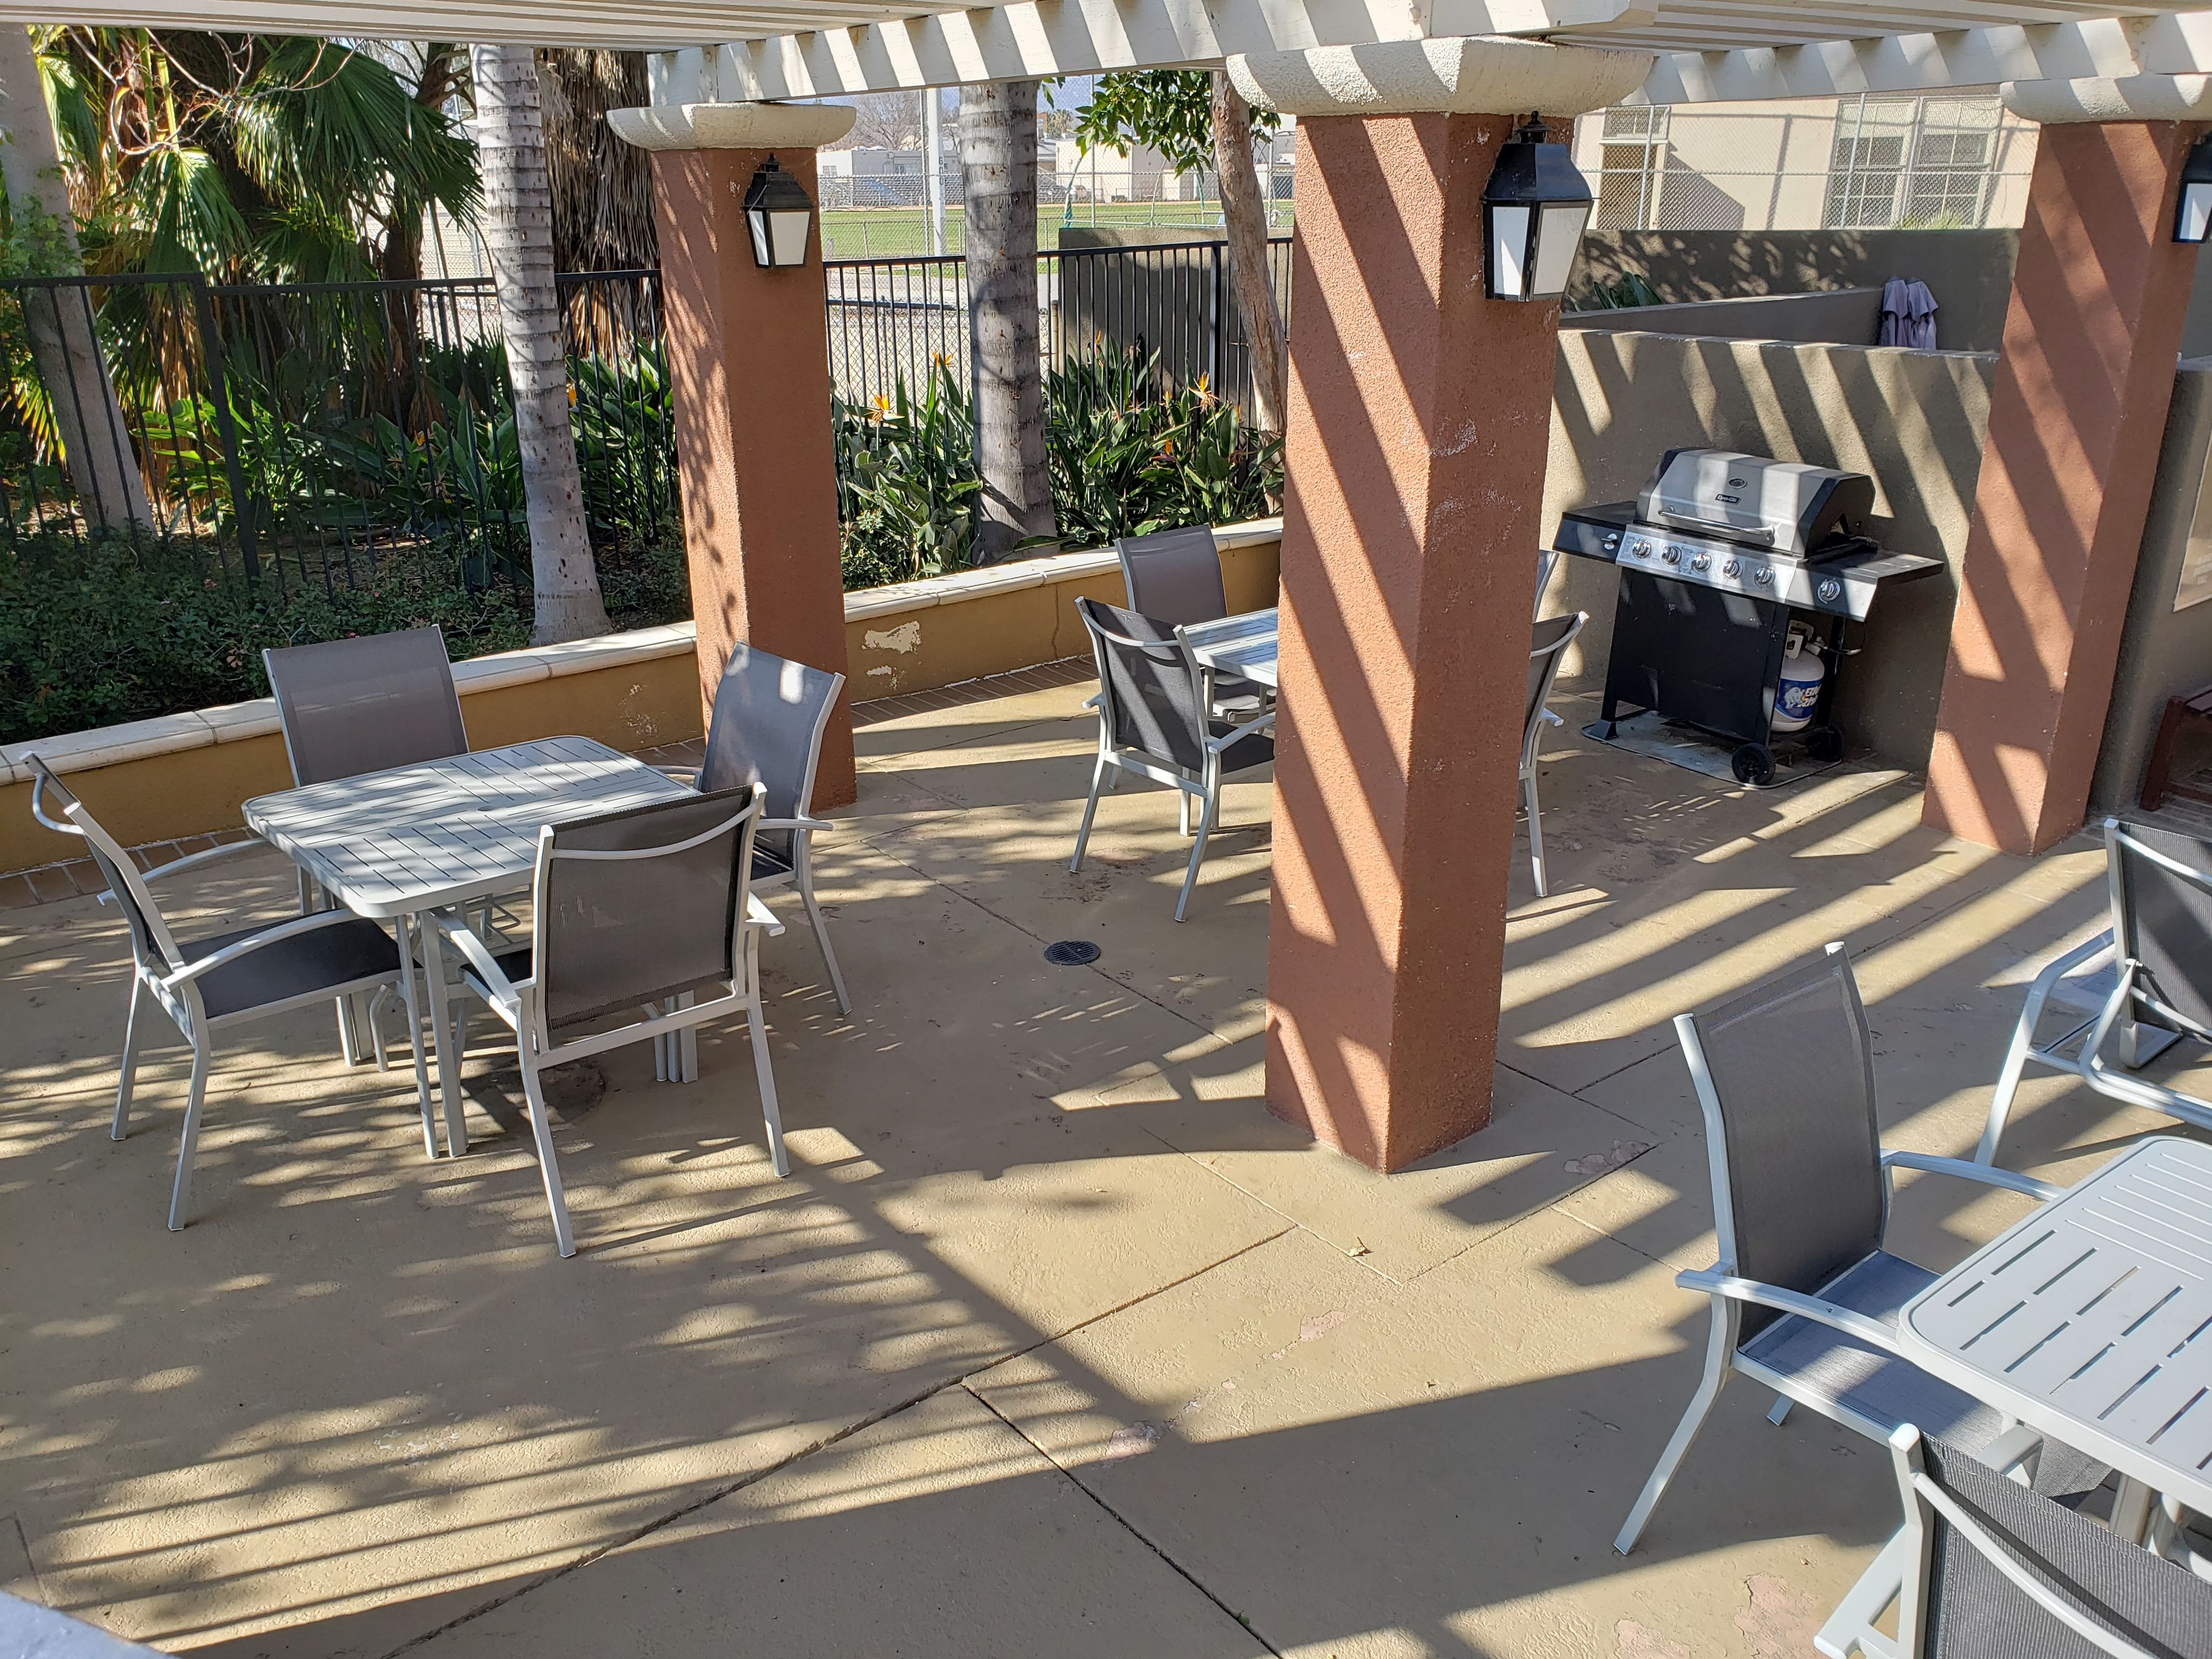 Image of vintage crossing senior apartments bbq area. Area is fenced off. bbq grill available under gazebo with tables and chairs. raised plant beds along fence